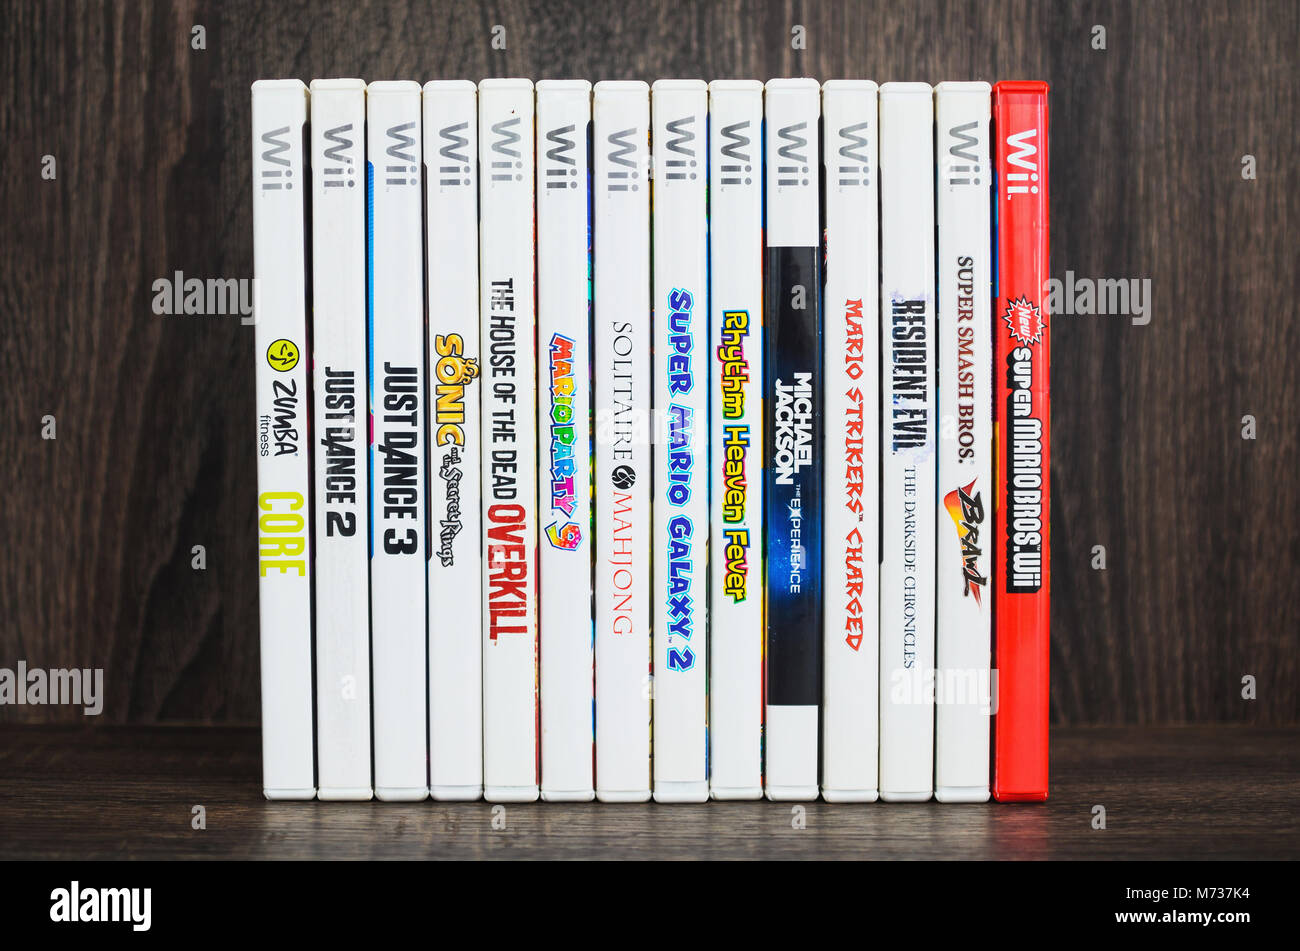 Brazil - March 02, 2018: Various Wii games for Nintendo Wii. Wii games discs. Stock Photo